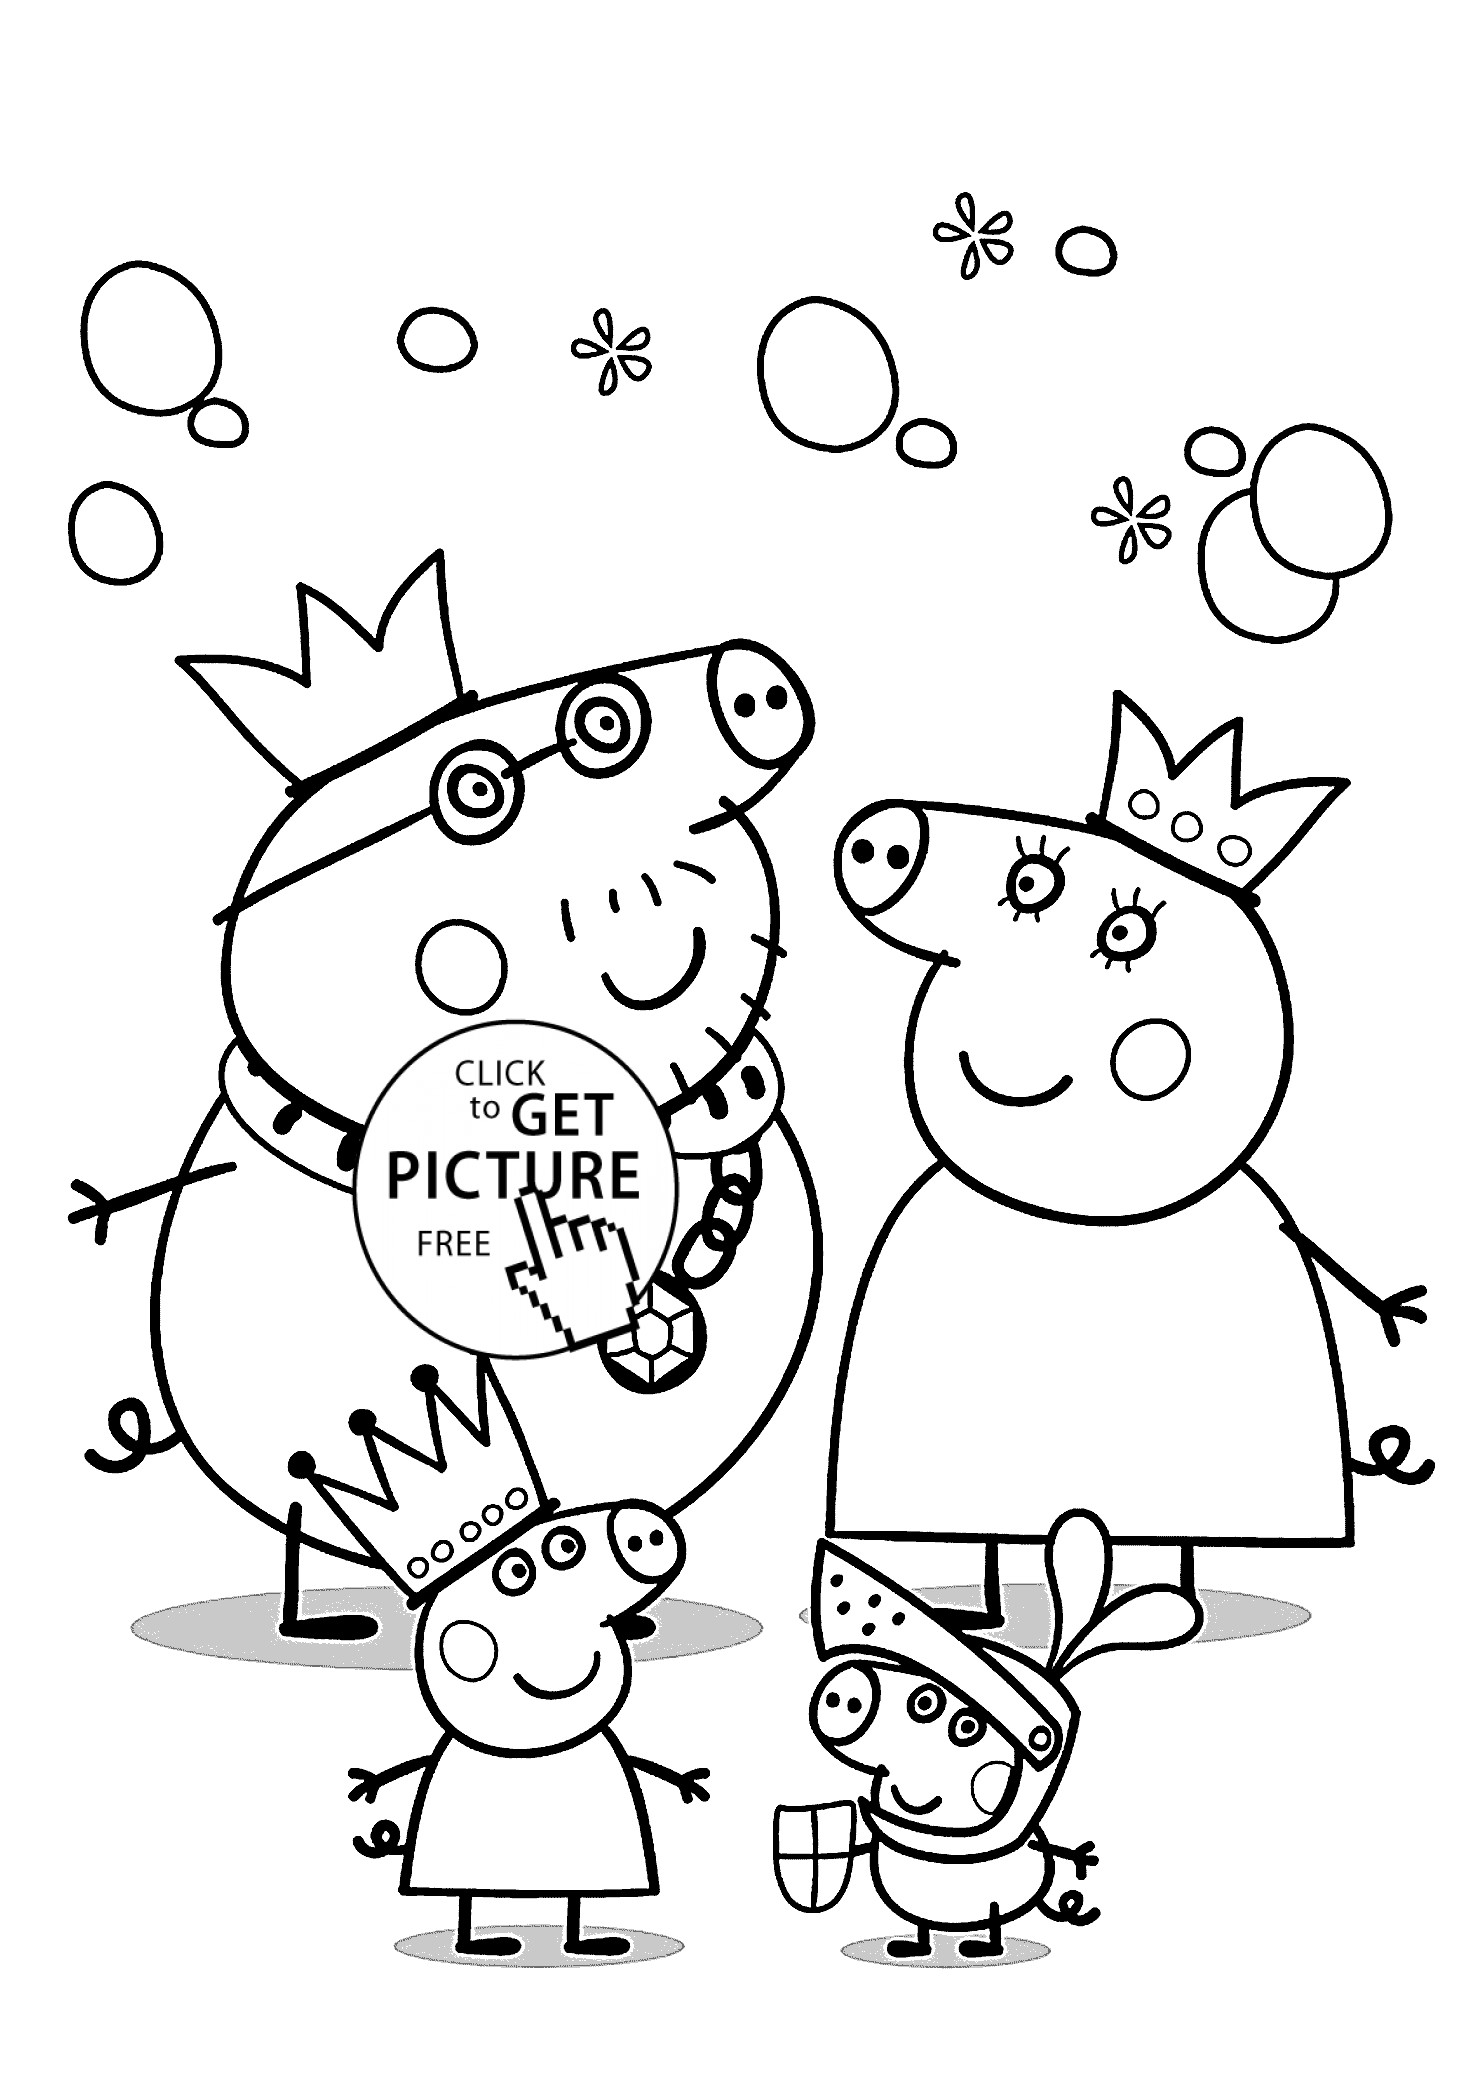 Peppa Pig Coloring Pages For Kids
 Peppa pig coloring pages for kids printable free